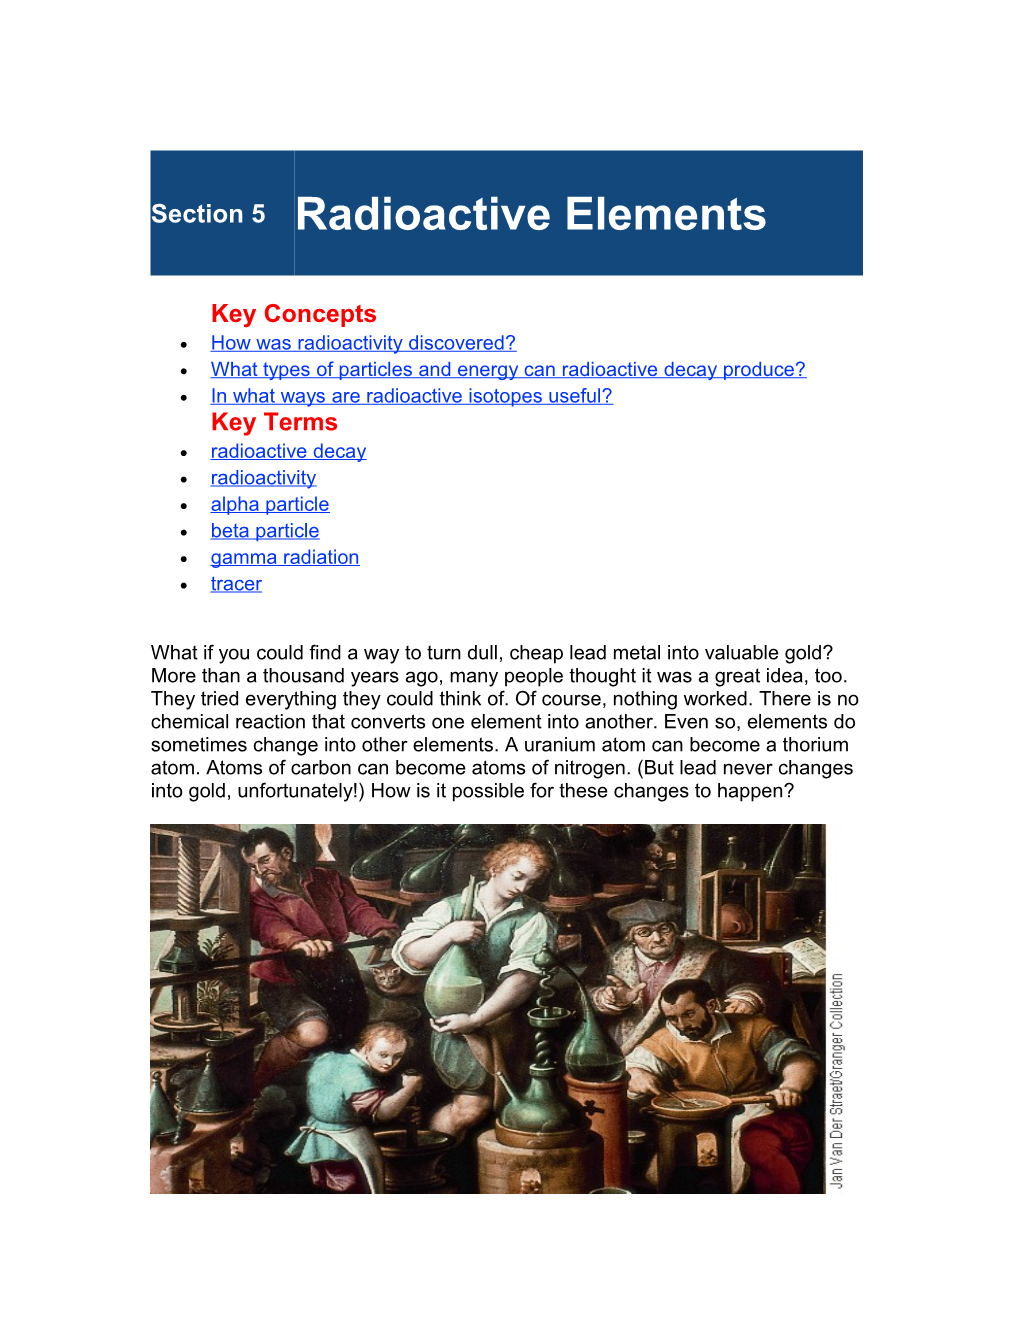 How Was Radioactivity Discovered?